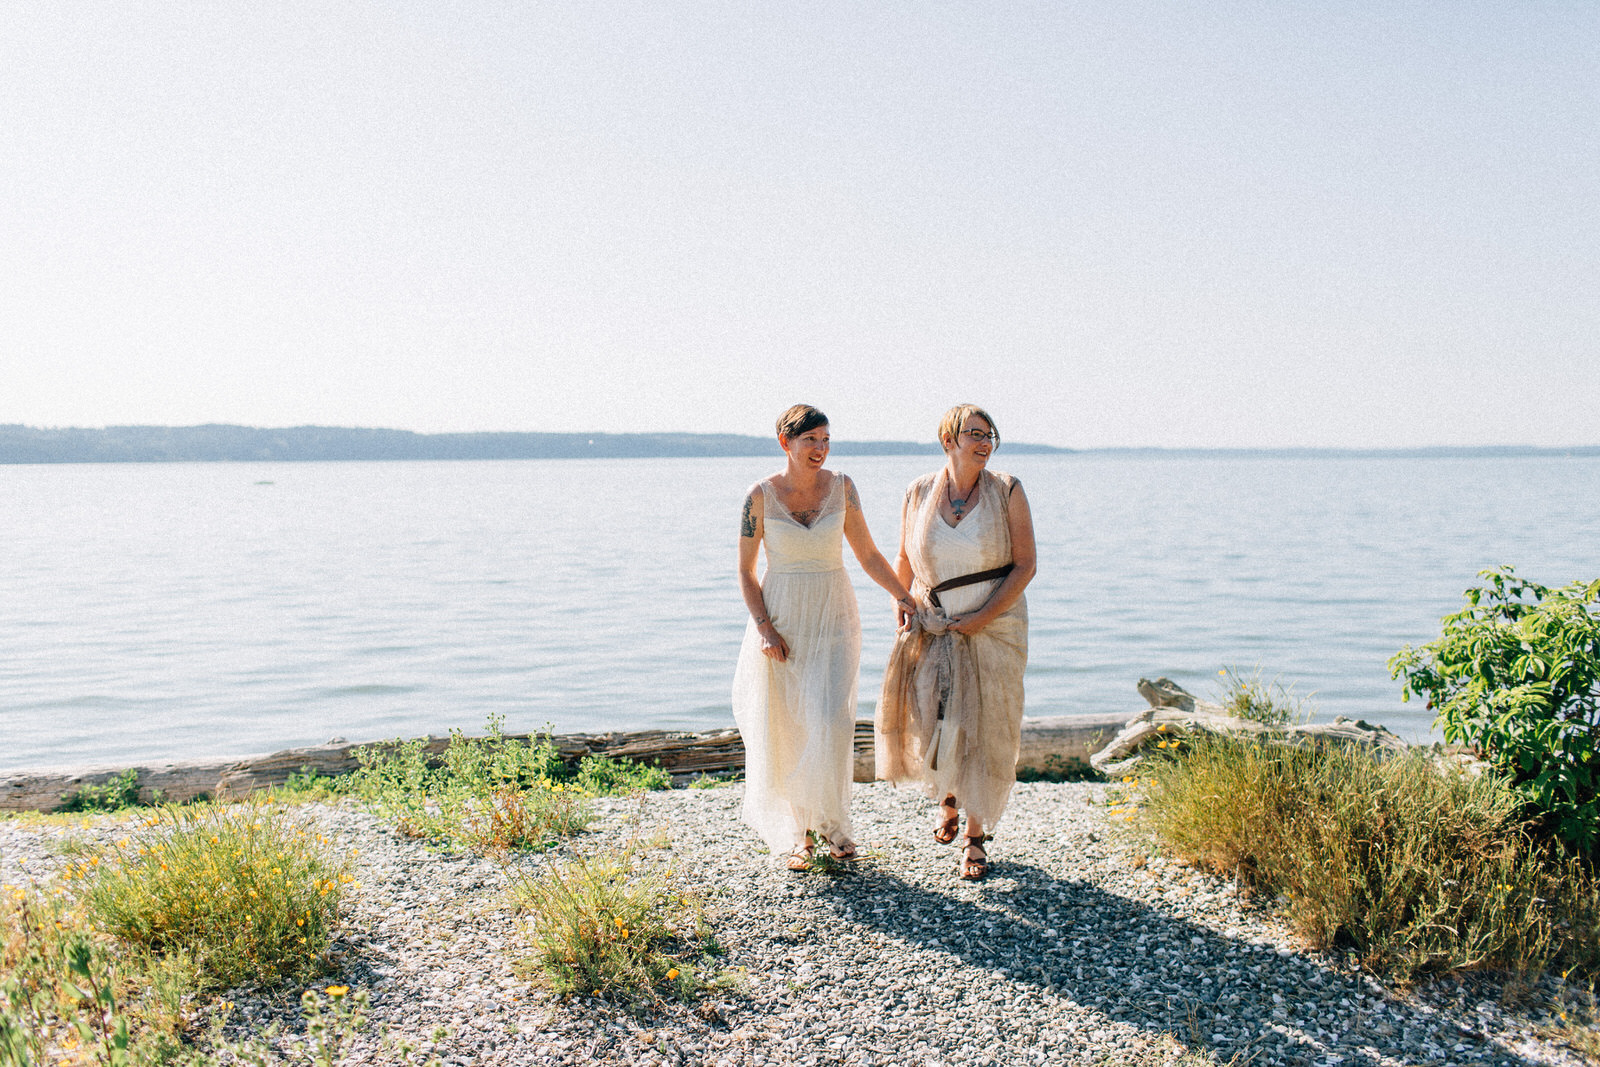 Two women in wedding dresses hold hands and walk along a pebbled beach, smiling